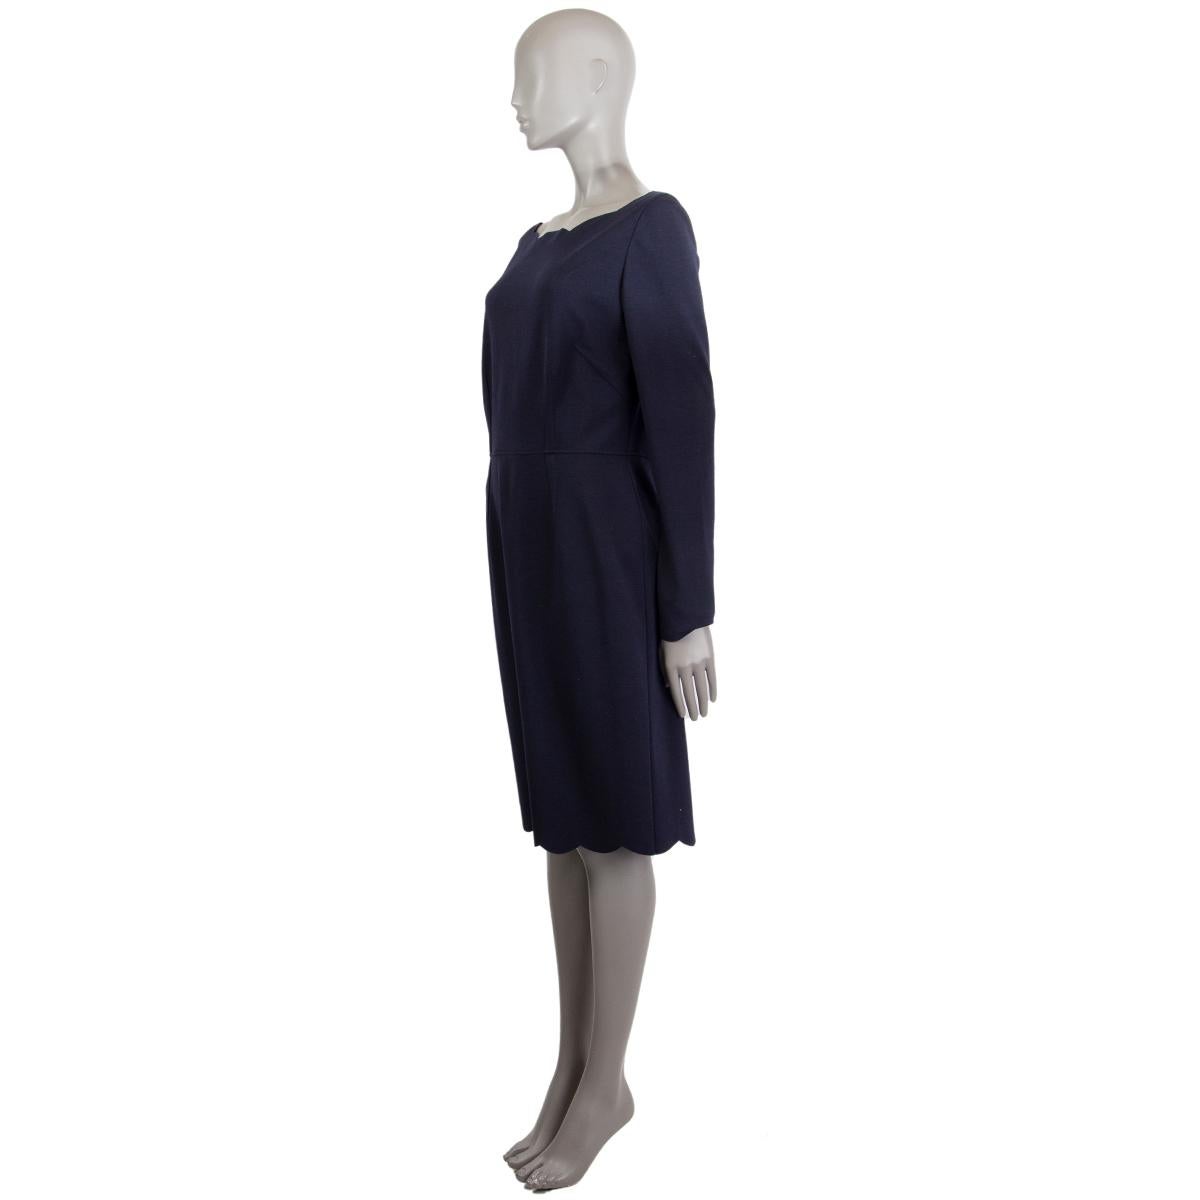 Valentino long-sleeve sheath dress in wool (84%), polyamide (11%) and elastane (5%) featuring scalloped hemline and wide neckline. Opens with a concealed zipper on the back. Undlined. Has been worn and is in excellent condition.

Tag Size 10
Size